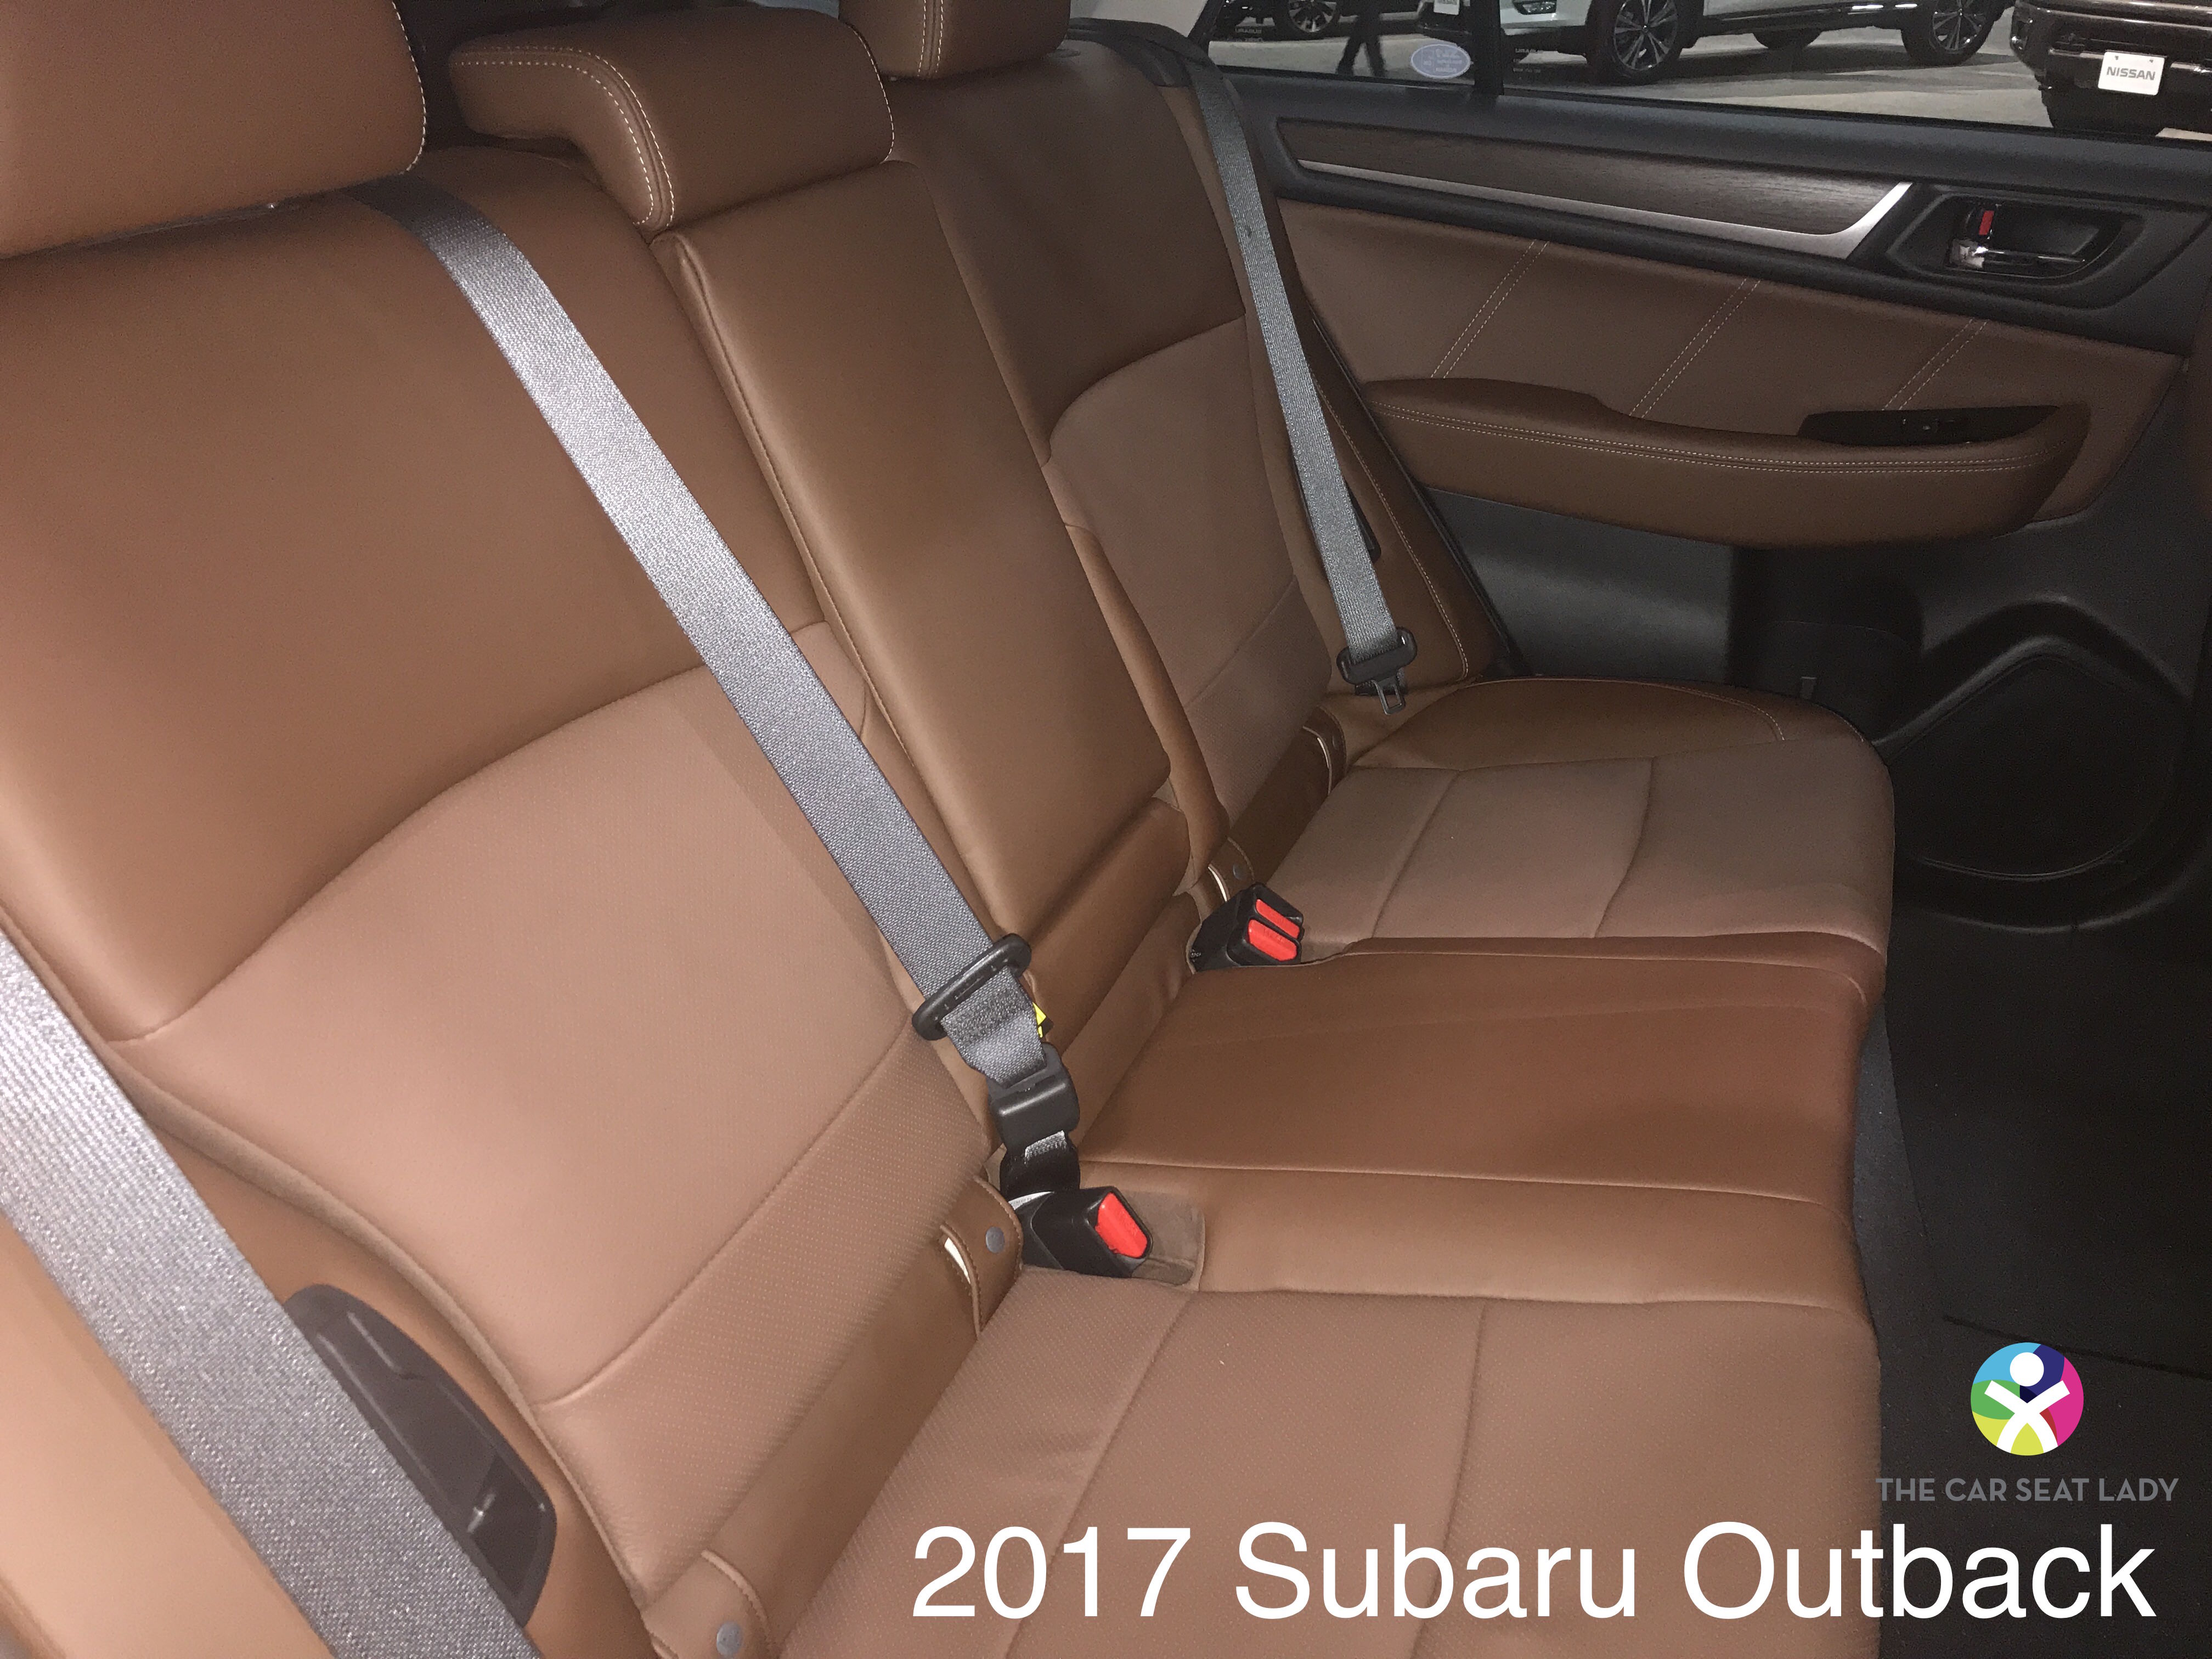 https://thecarseatlady.com/wp-content/uploads/2017/04/2017-Subaru-Outback-side.jpg